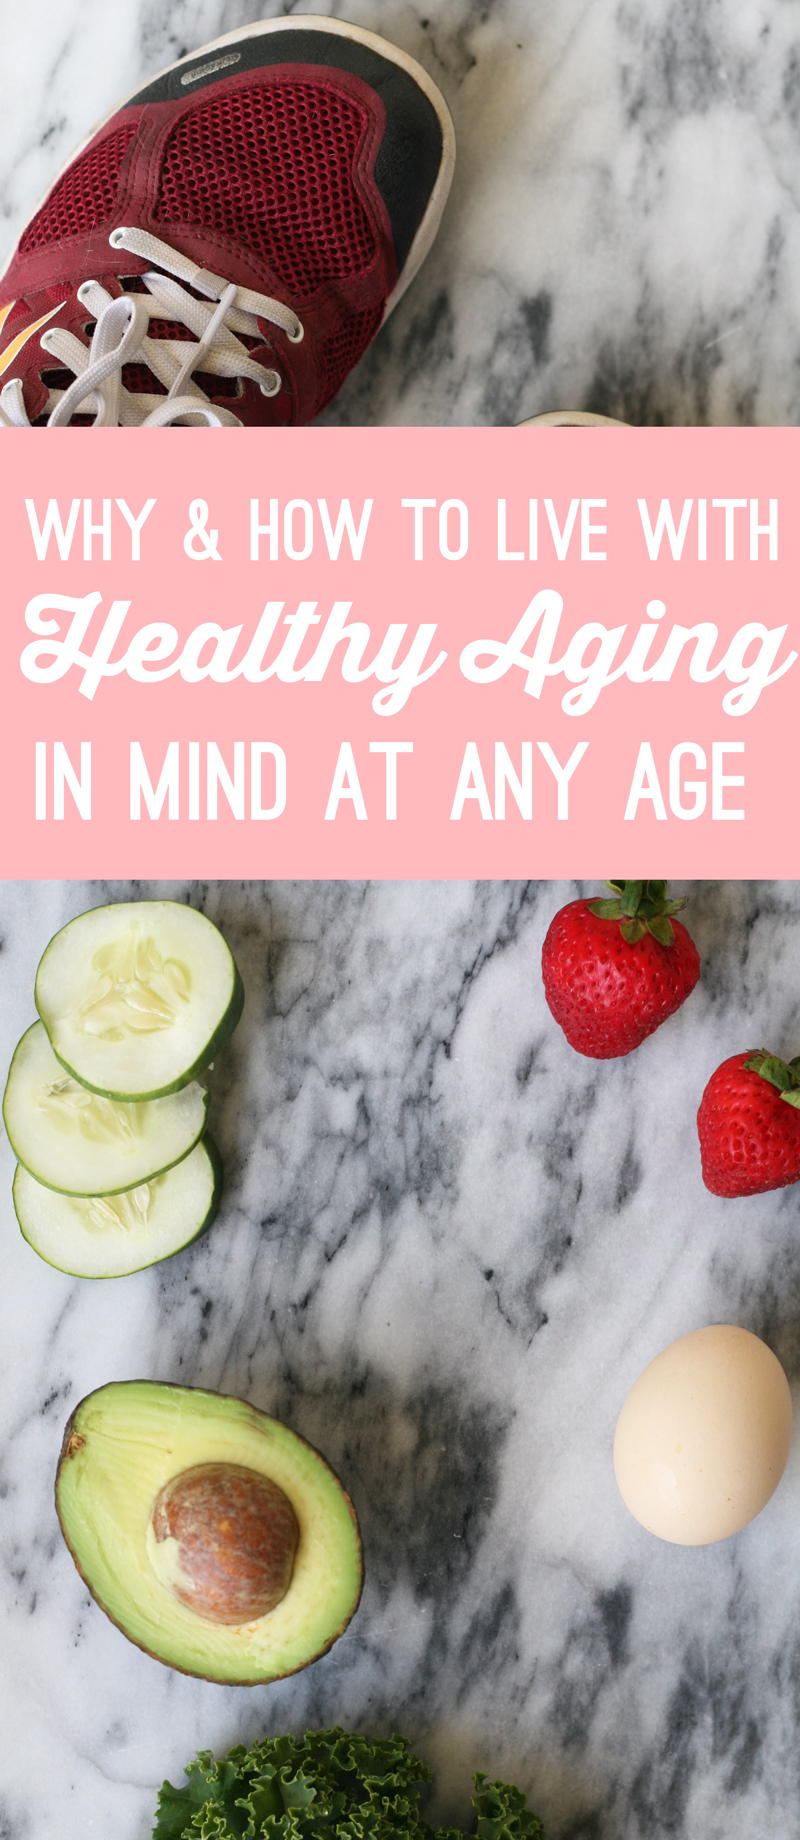 Why & How to Live With Healthy Aging in Mind at Any Age 